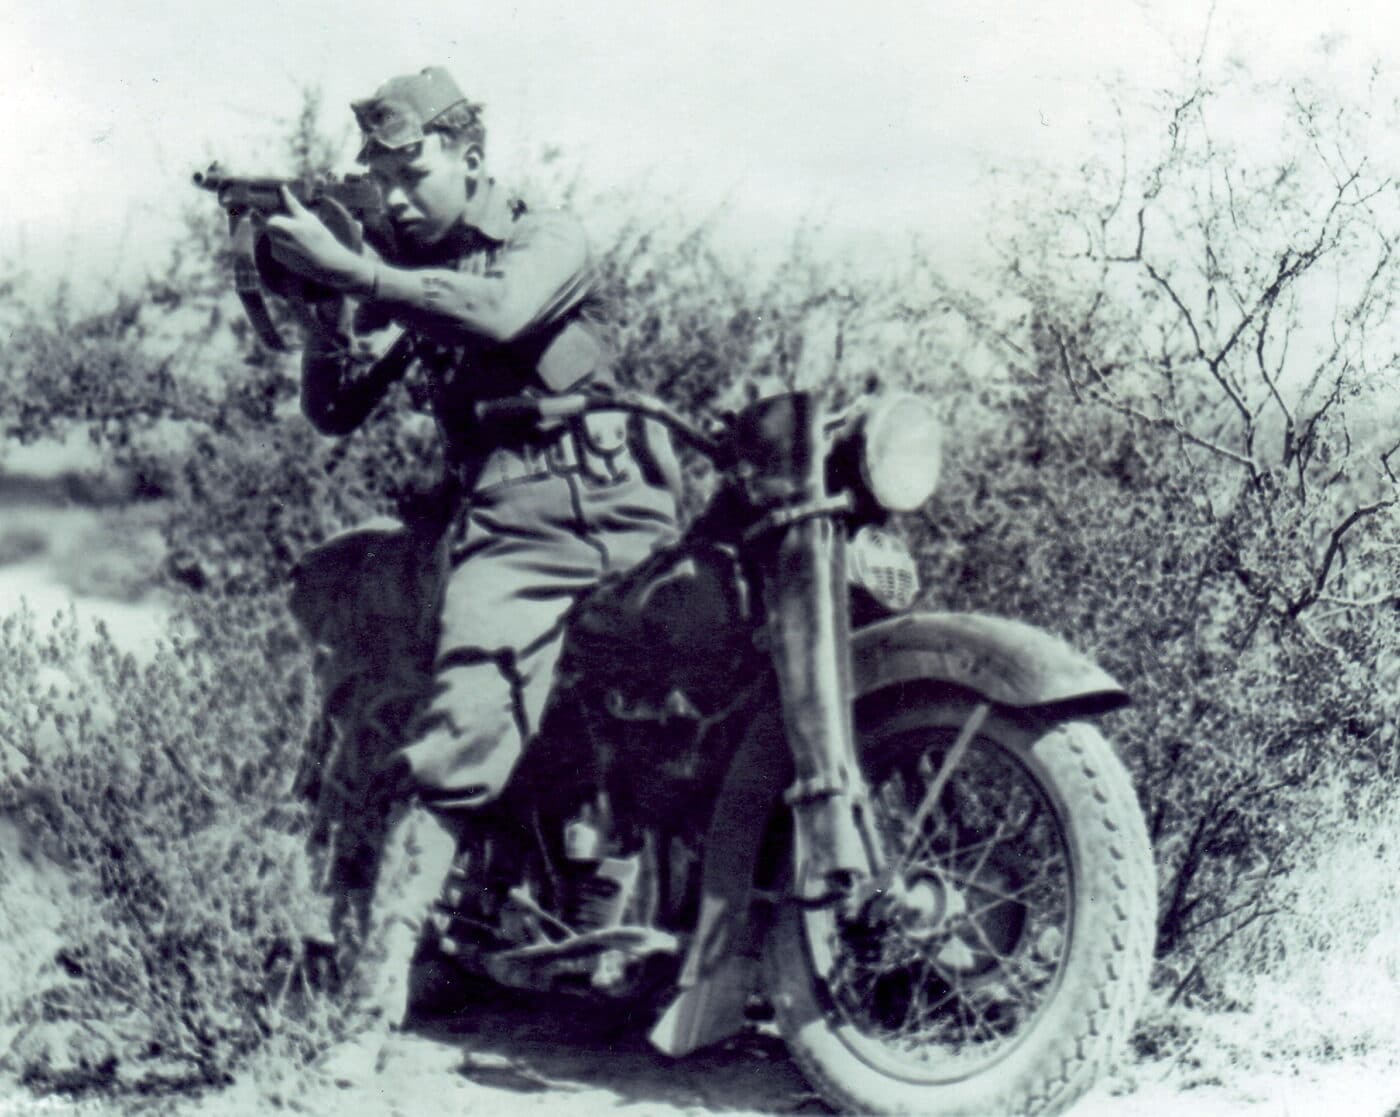 Solider using a Thompson SMG while on motorcycle